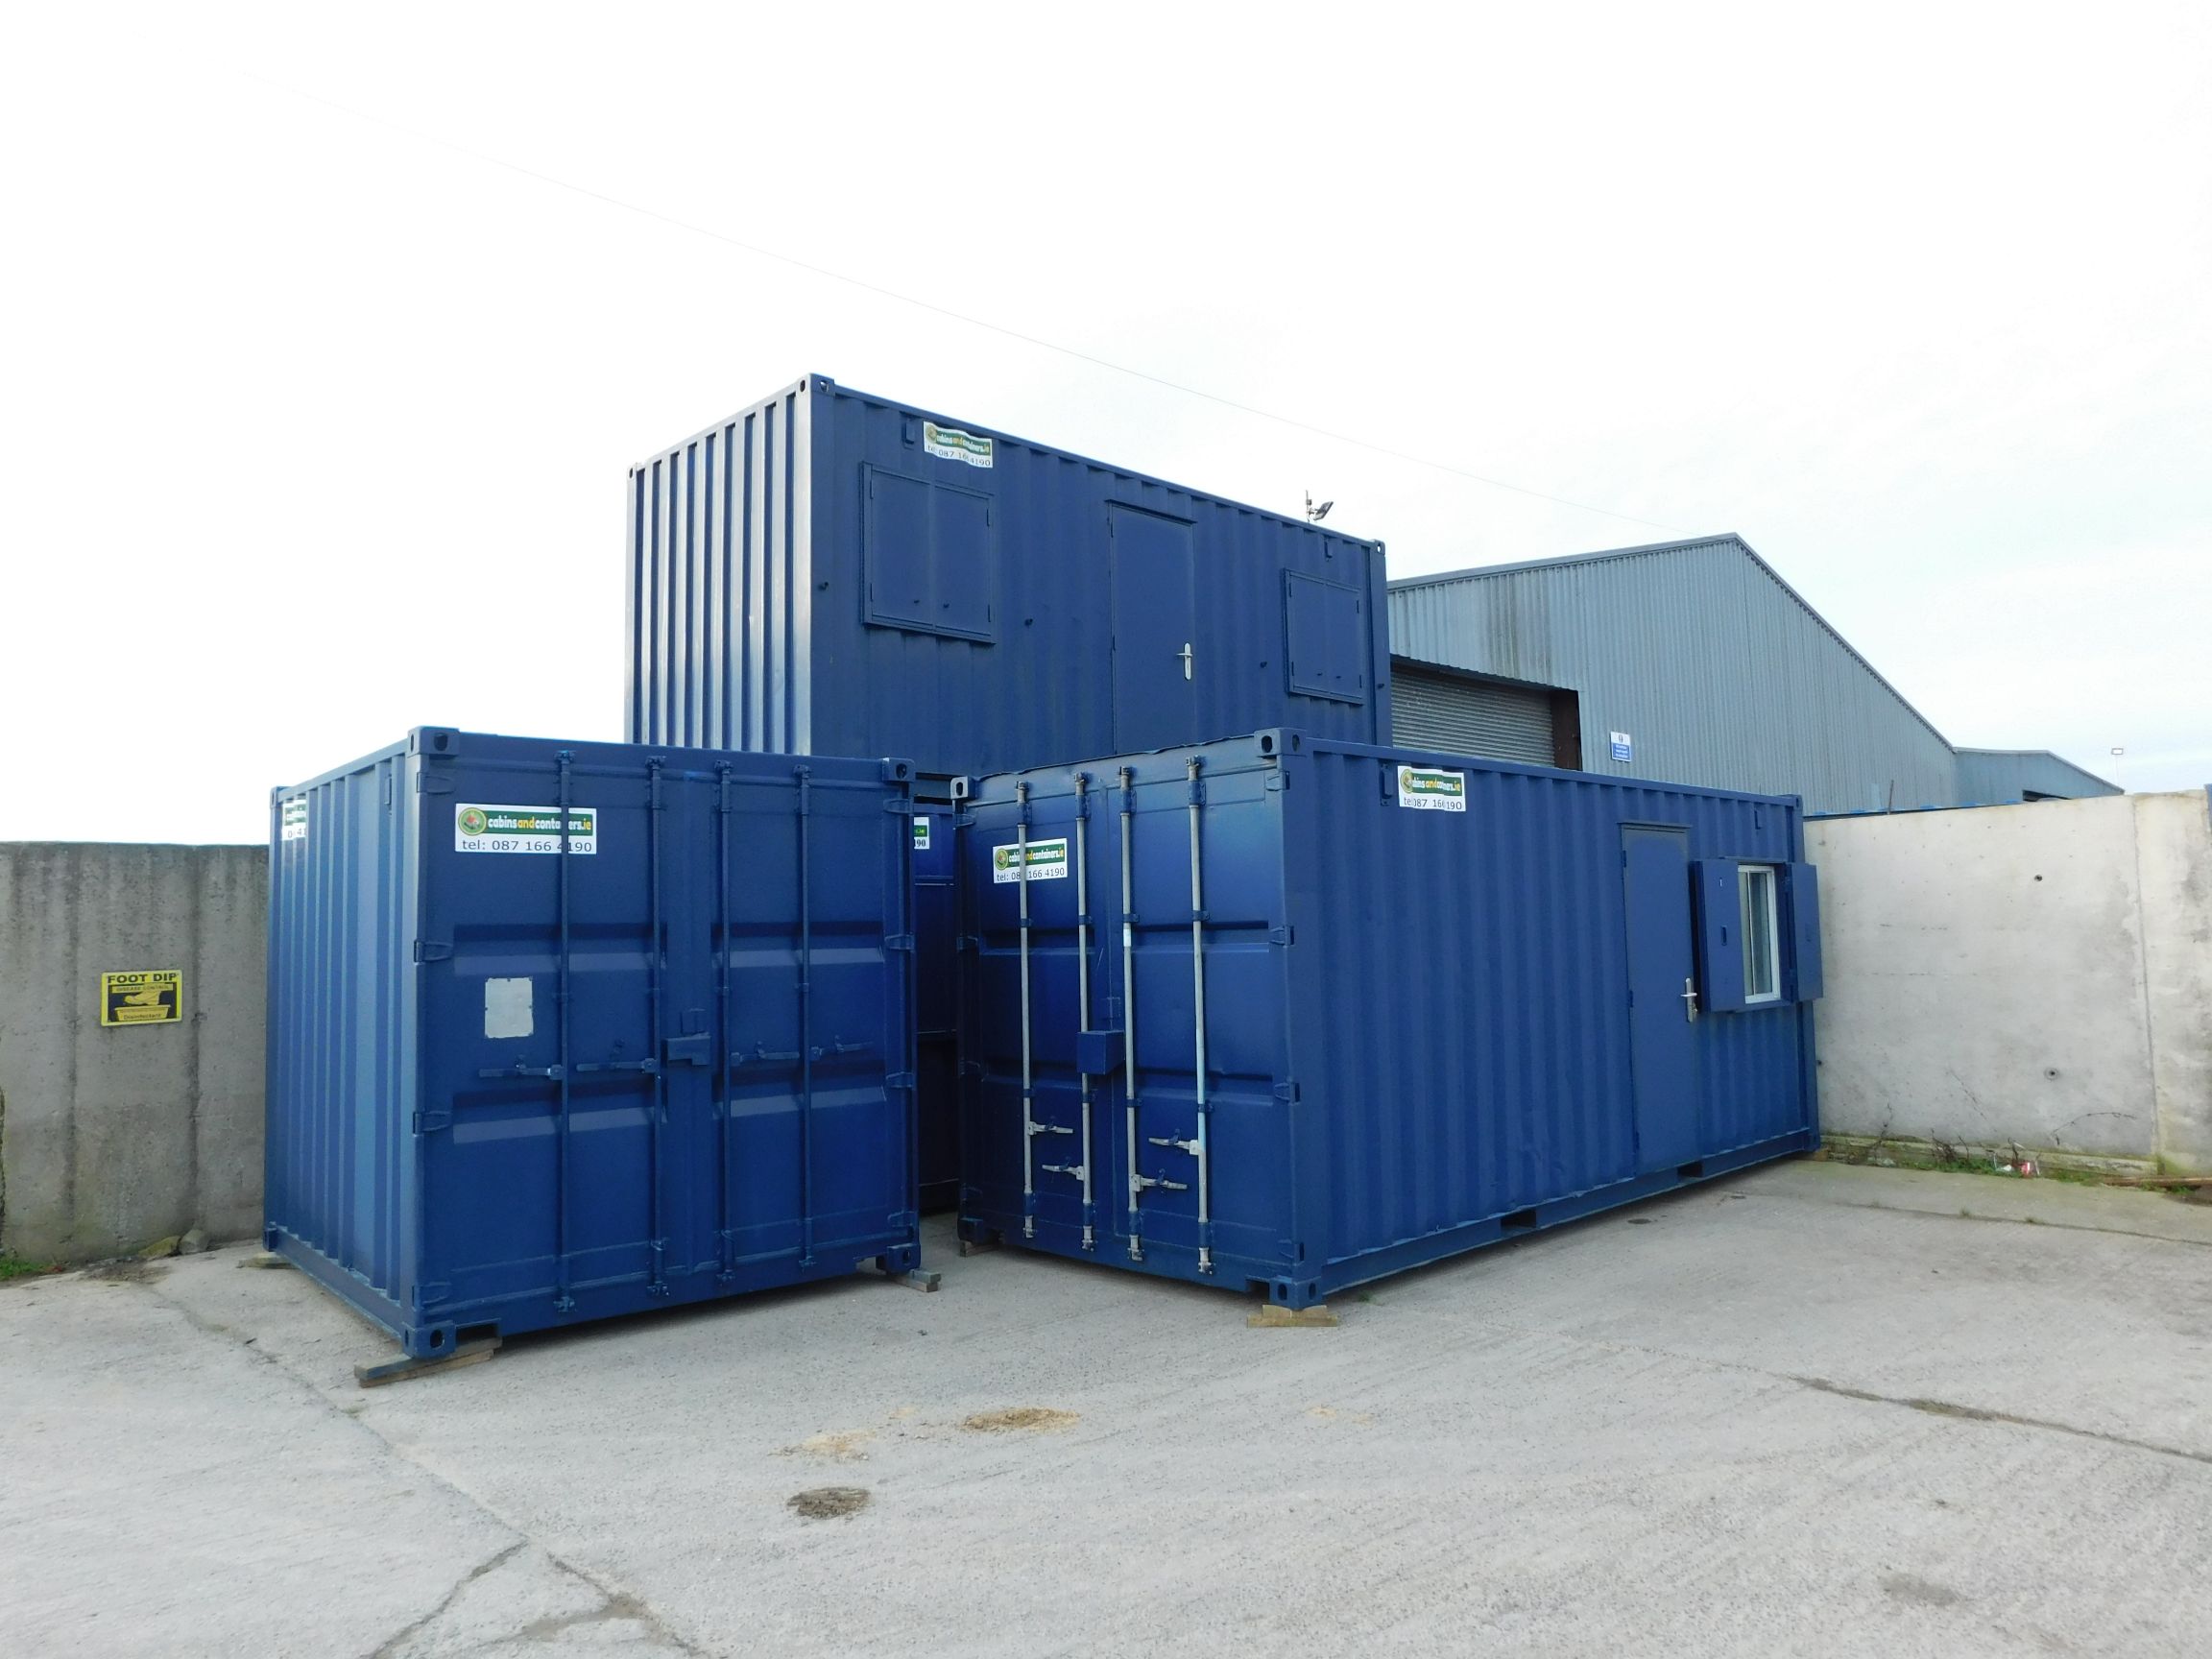 Excellent Tips for Utilizing a Storage Container